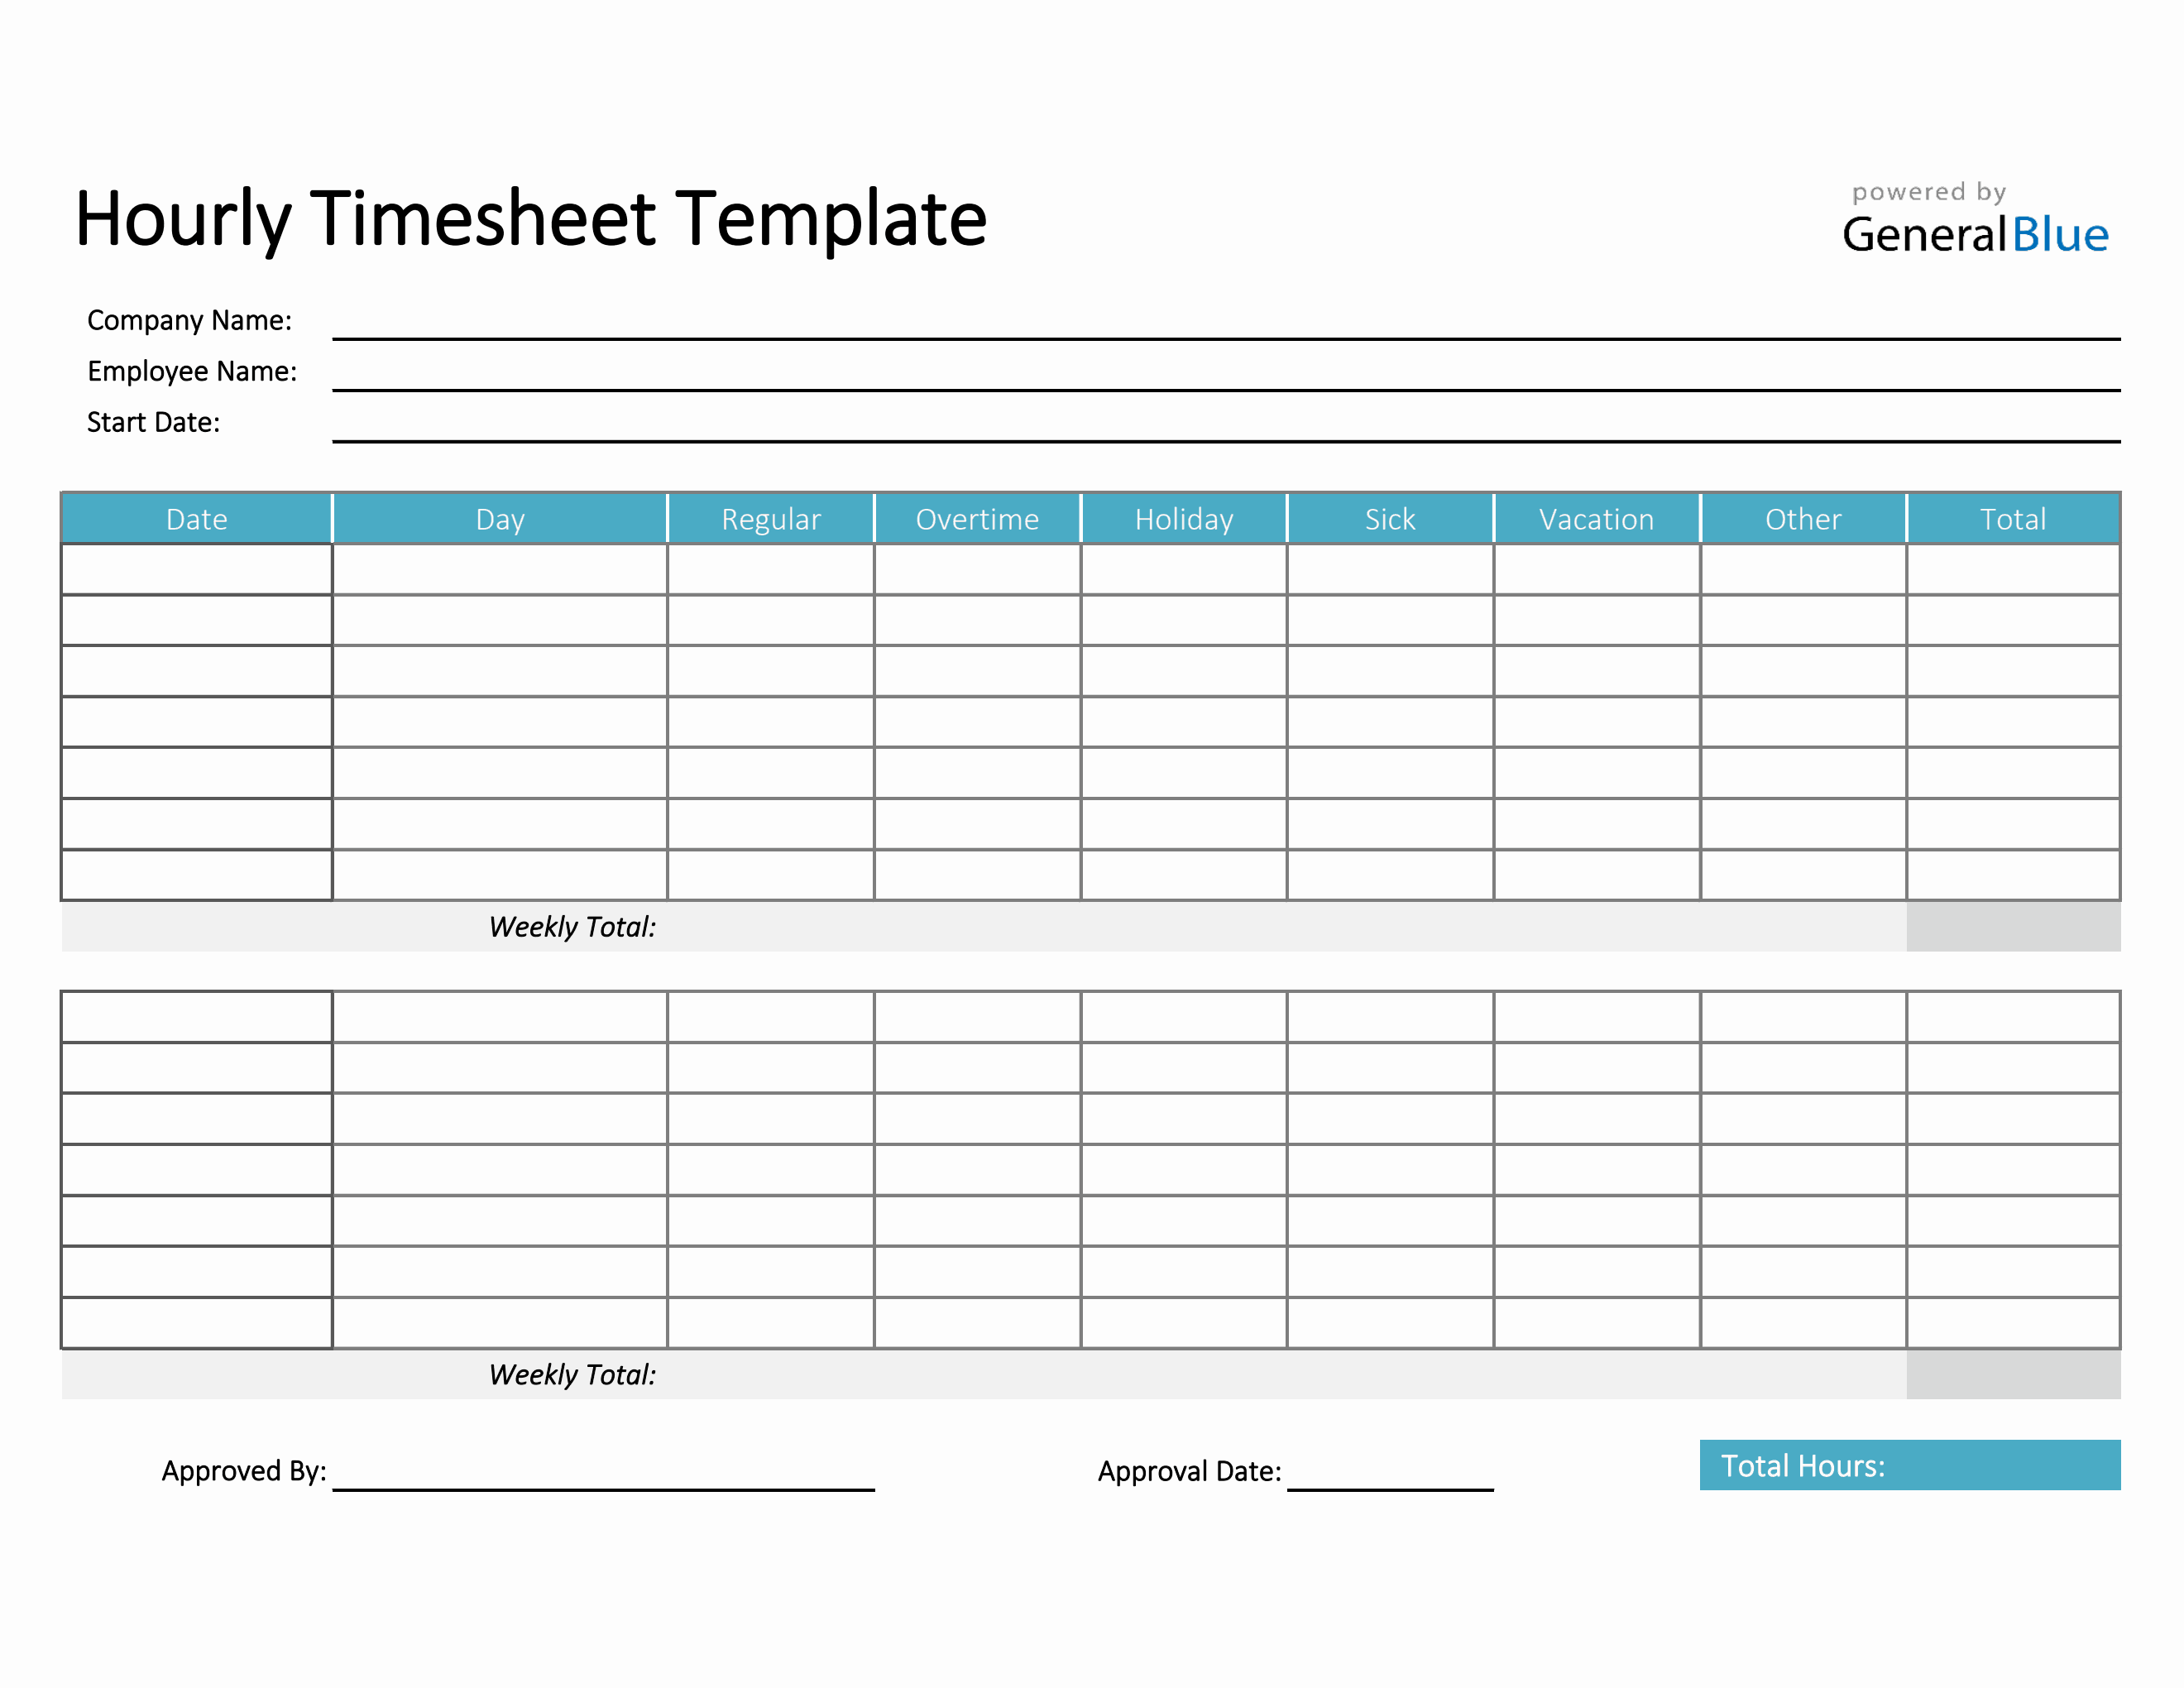 Hourly Timesheet Template In Excel Basic